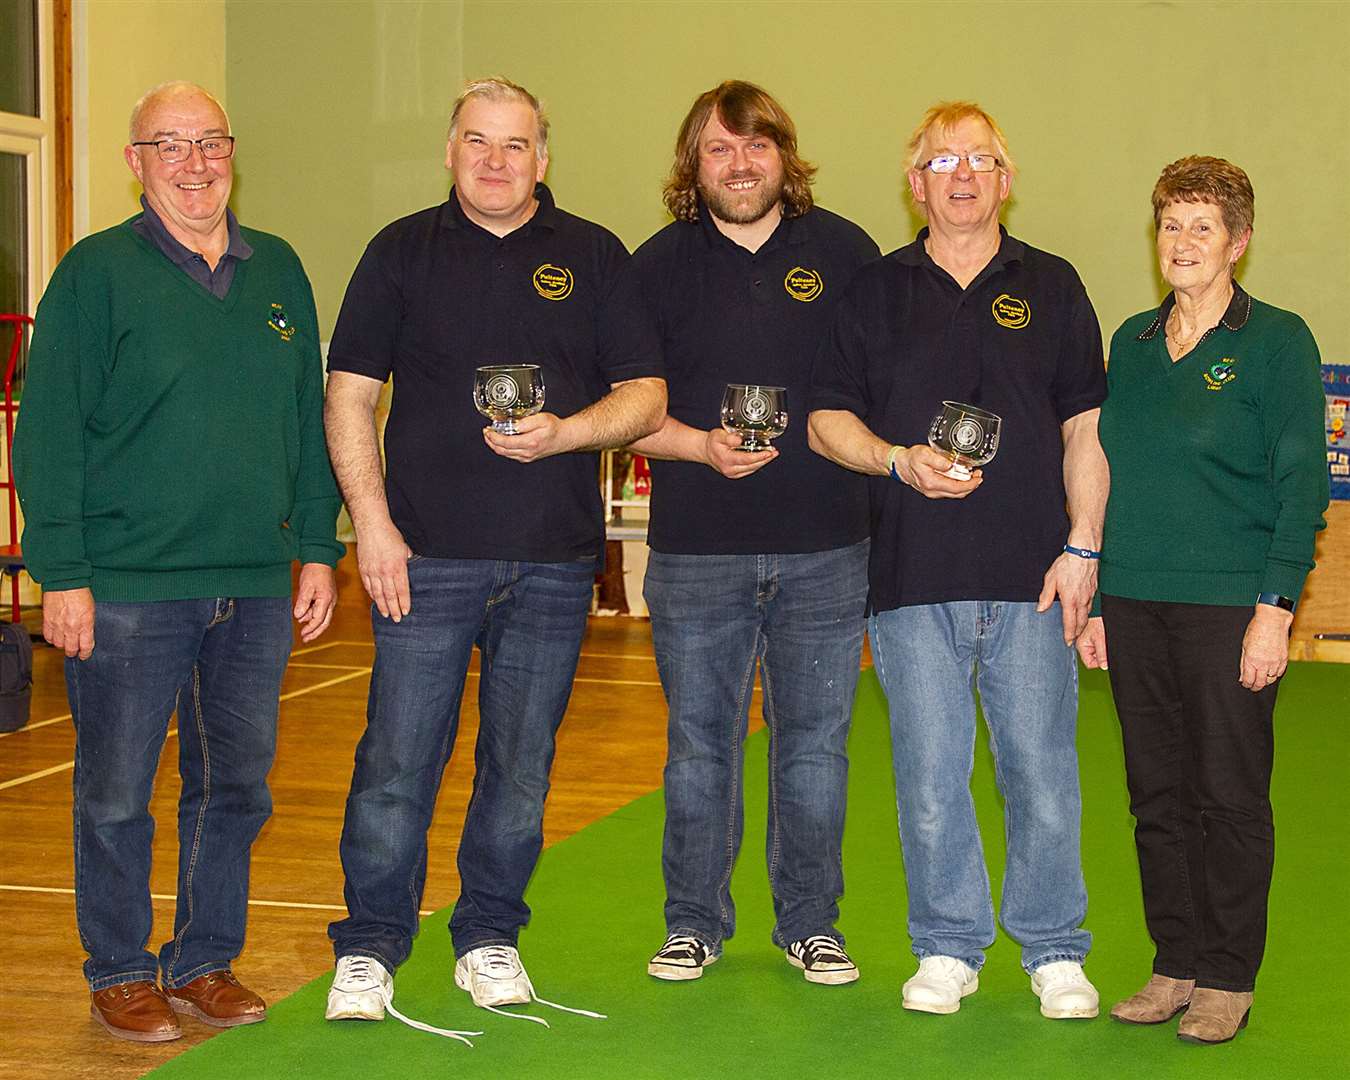 Reay Bowling Club president John Braid (left) and Lillian Campbell (right) with runners-up Malcolm Simpson, Mark Banks and Terry Candeland.